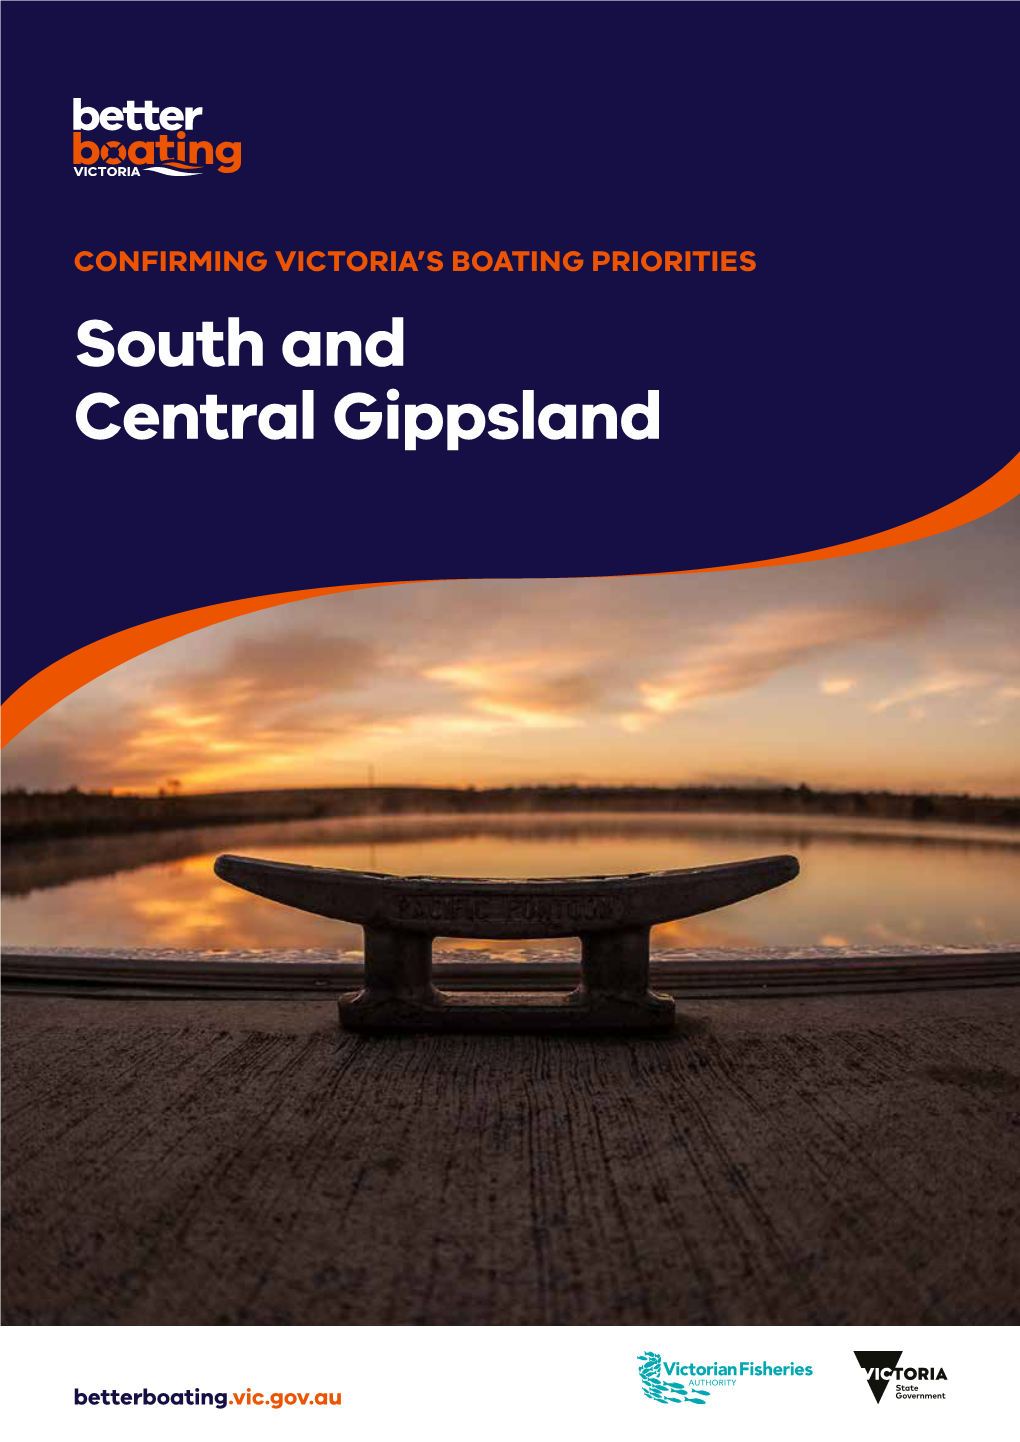 South and Central Gippsland